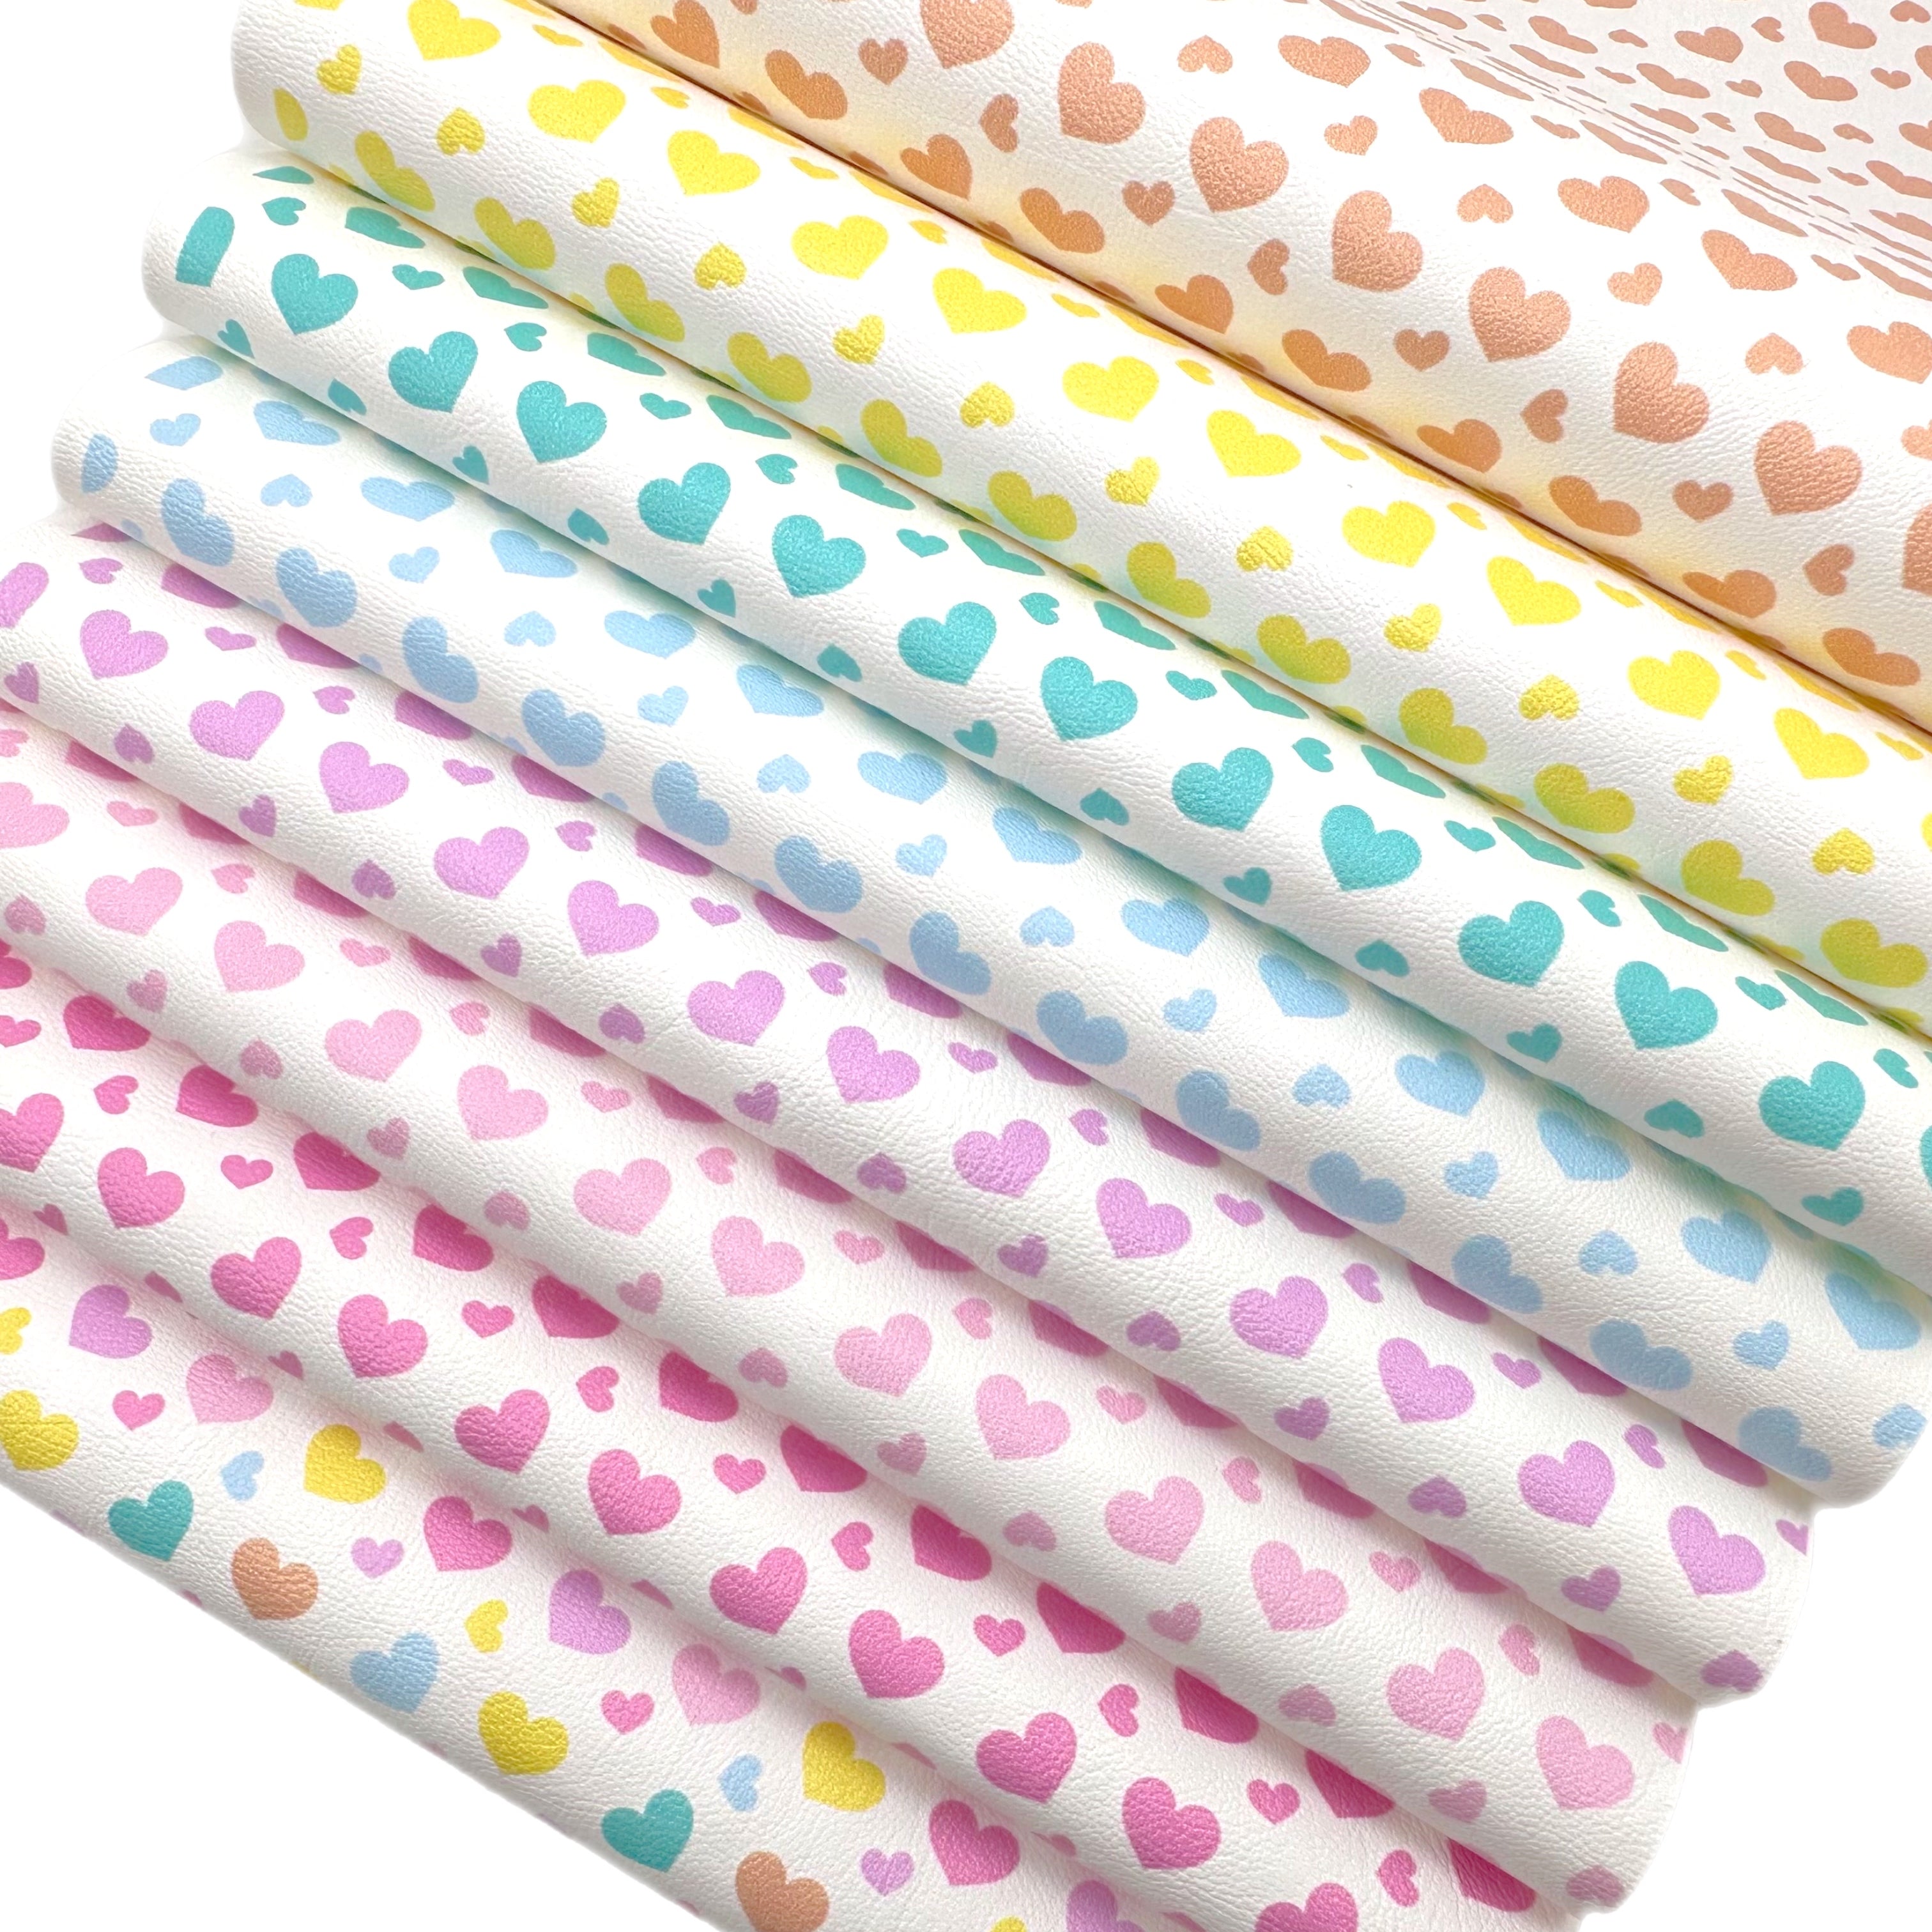 Perfect Pastel Hearts Premium Faux Leather Fabric Sheets